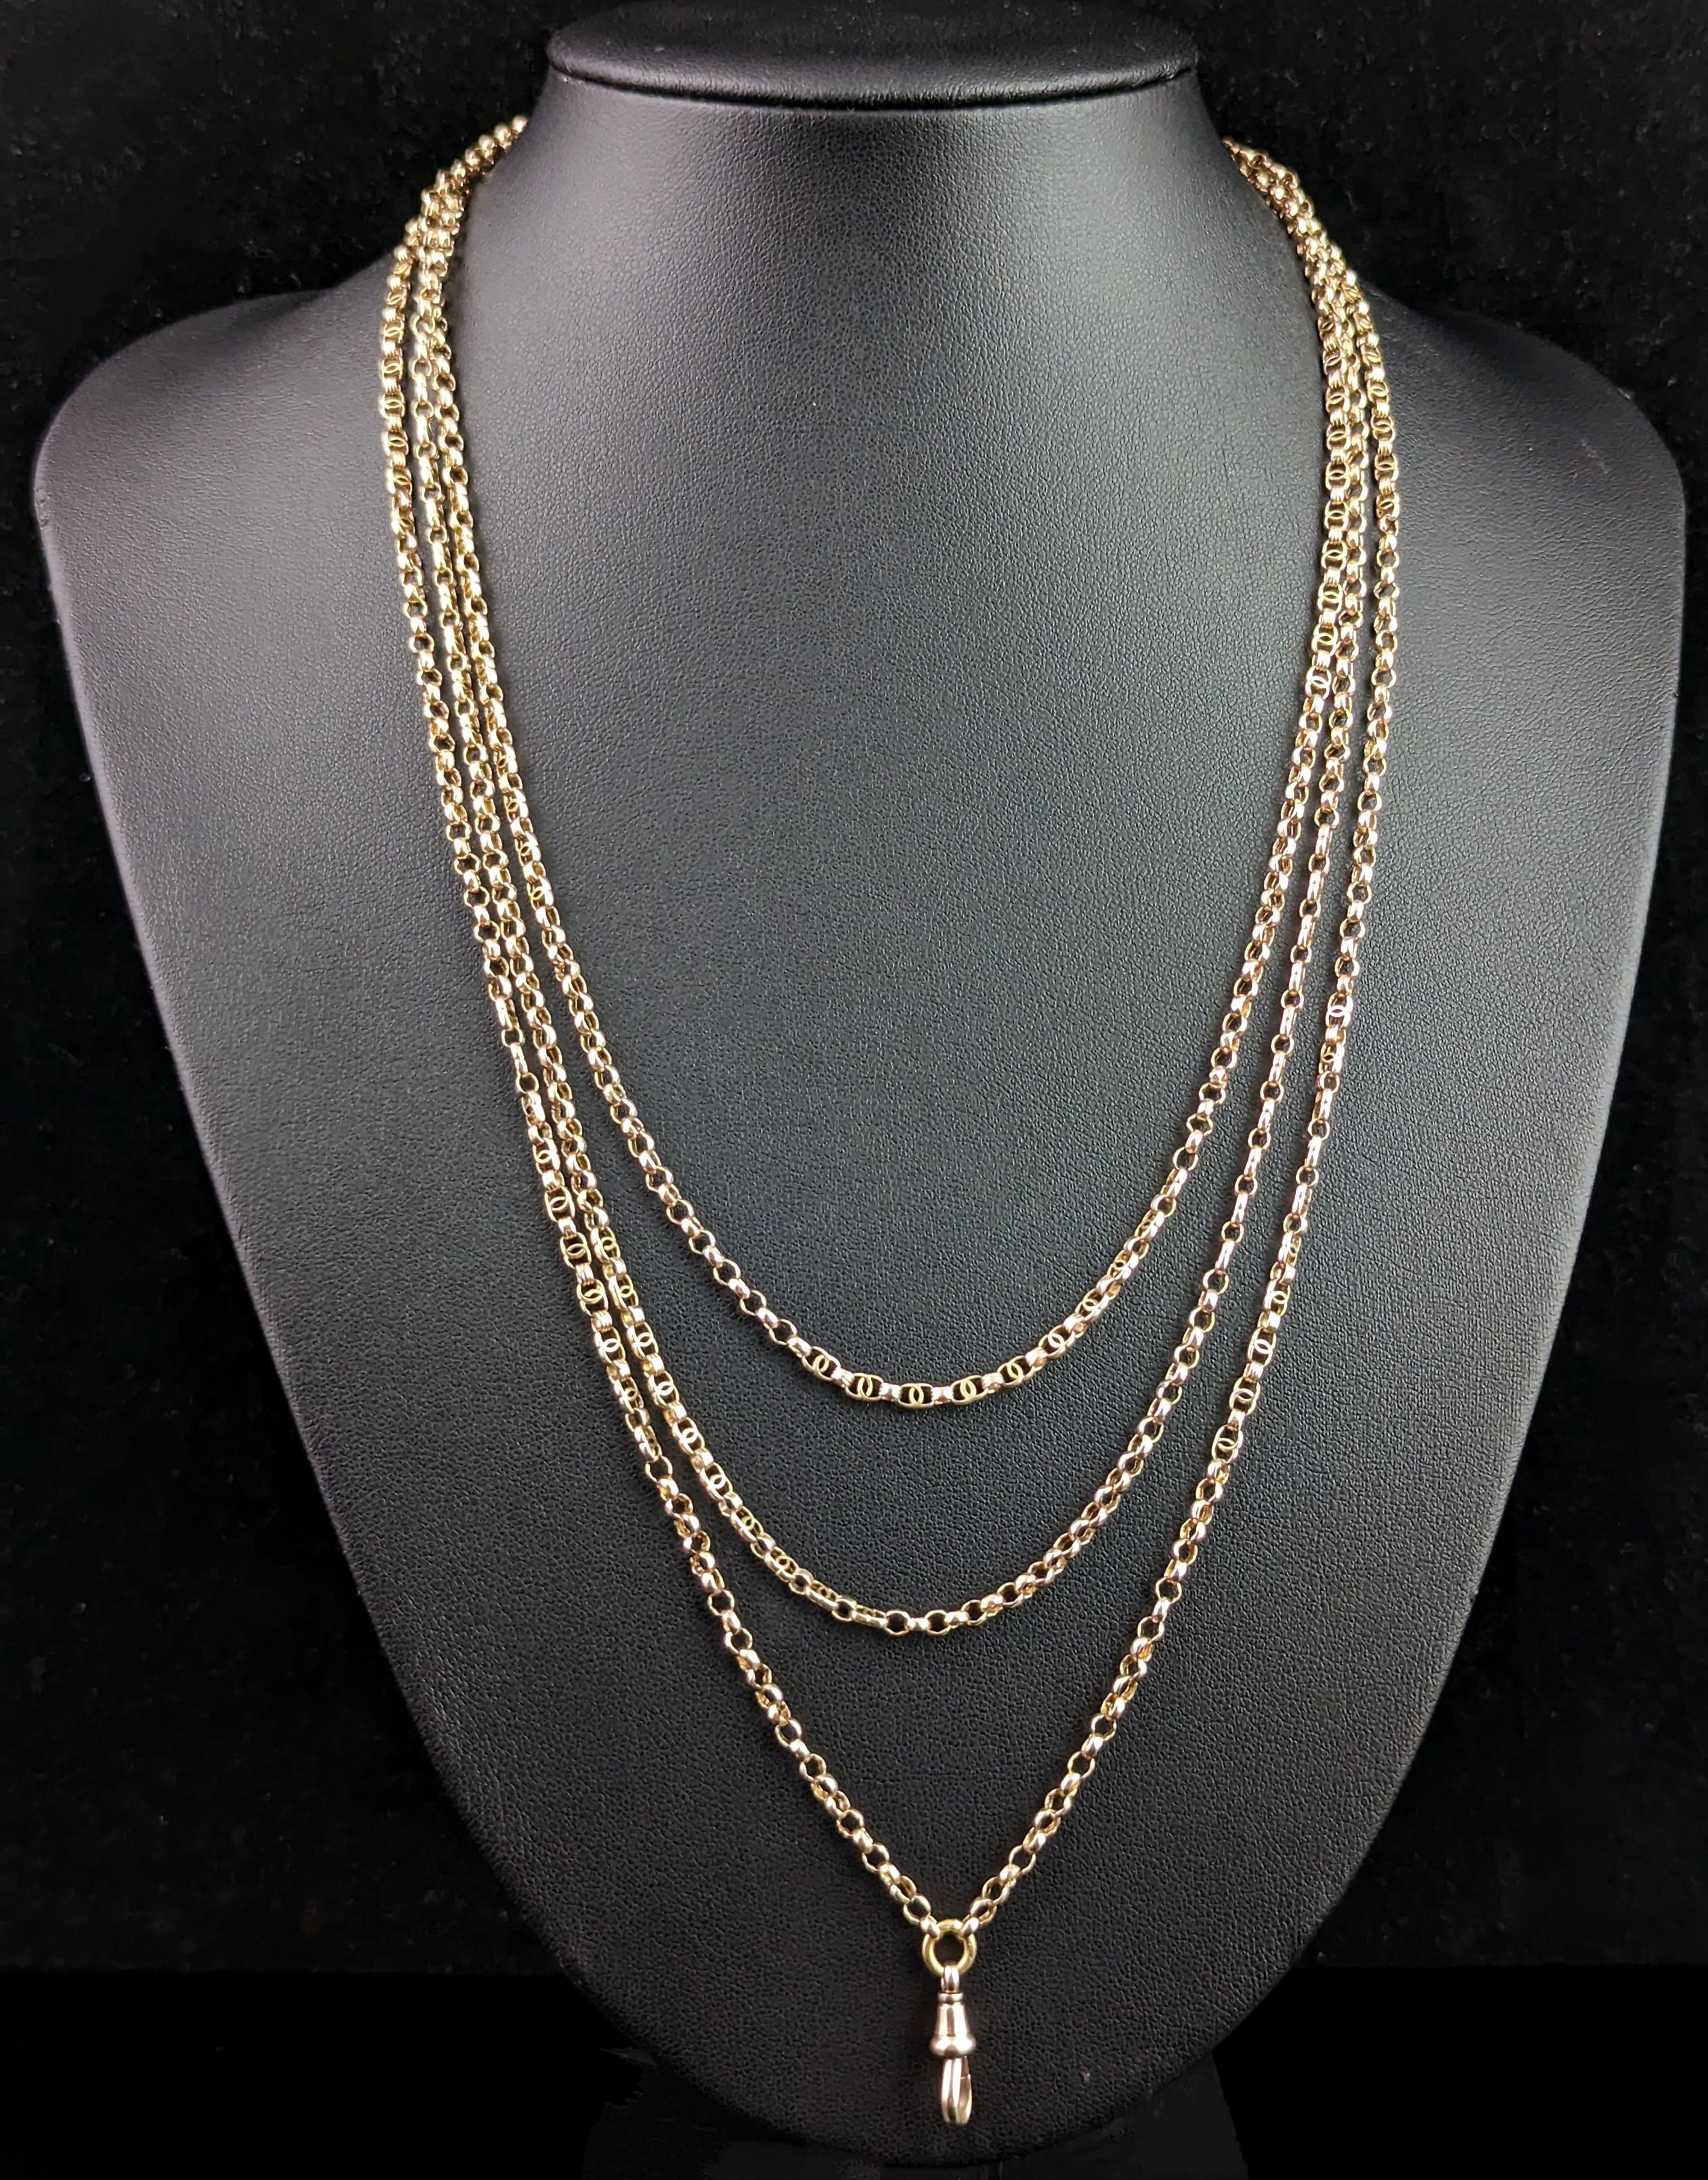 Antique 9k Gold Longuard Chain Necklace, Rolo and Fancy Link, Victorian For Sale 7